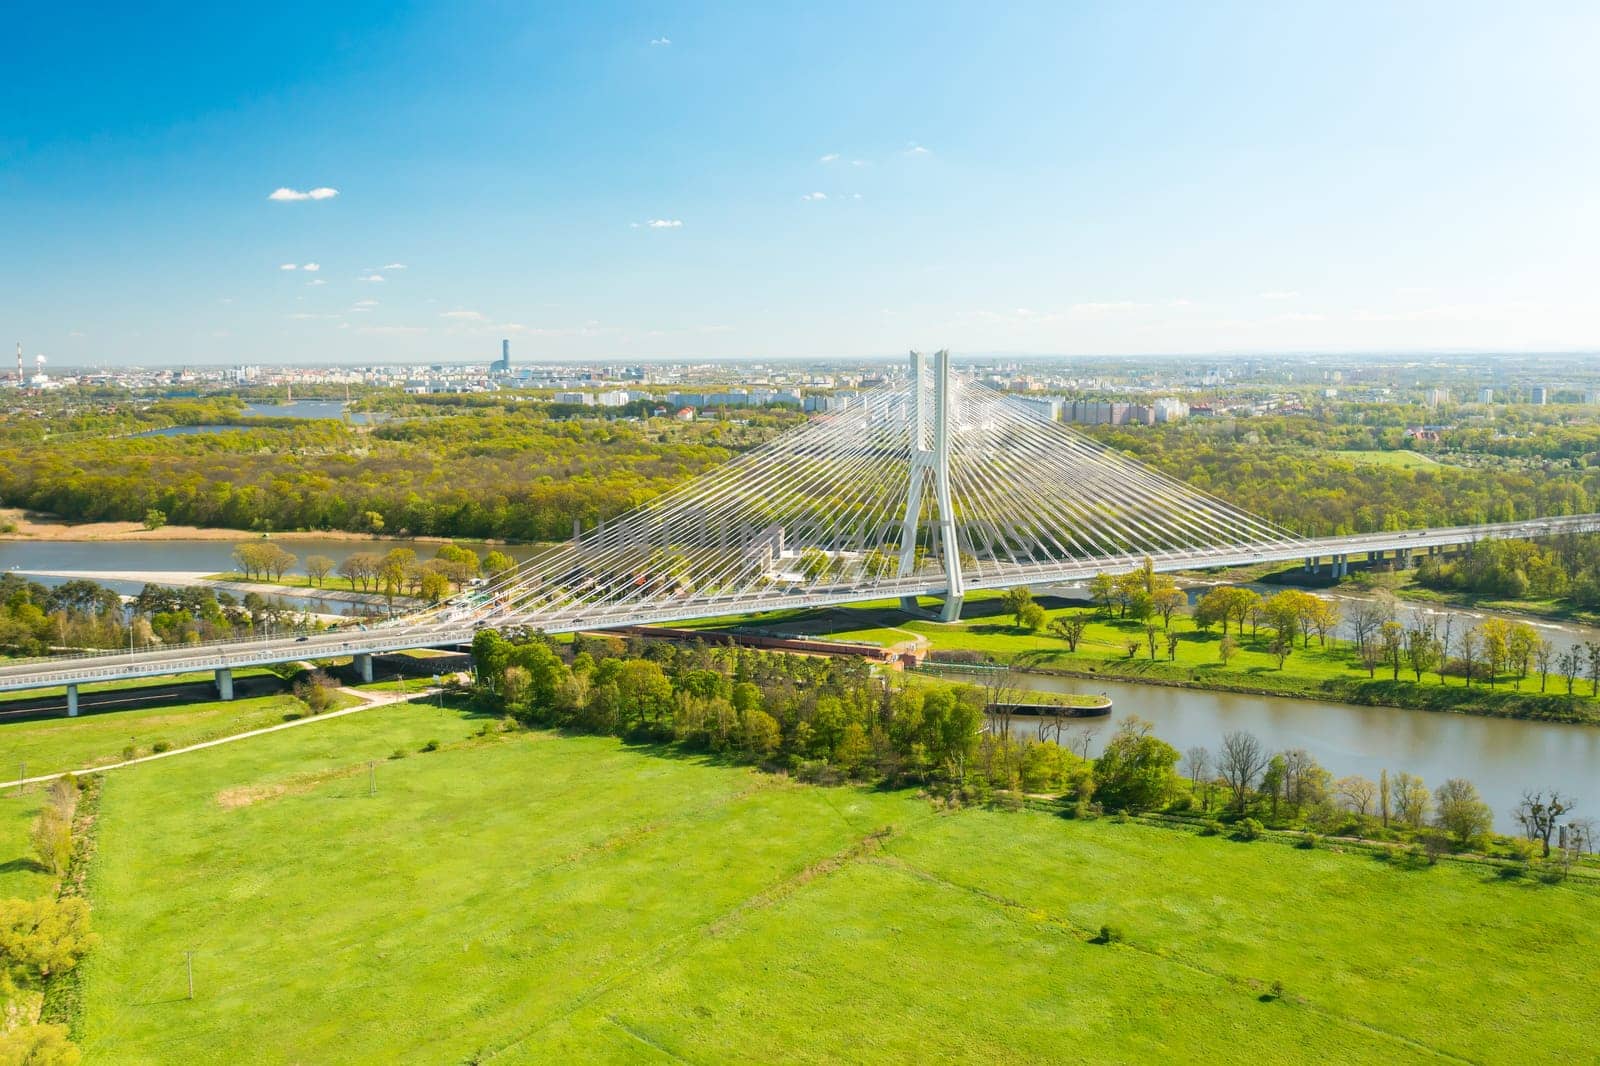 Cars drive on cable-stayed Redzinski Bridge over river flowing near scenic Wroclaw. Pylon bridge surrounded by lush green forests aerial motion along bridge